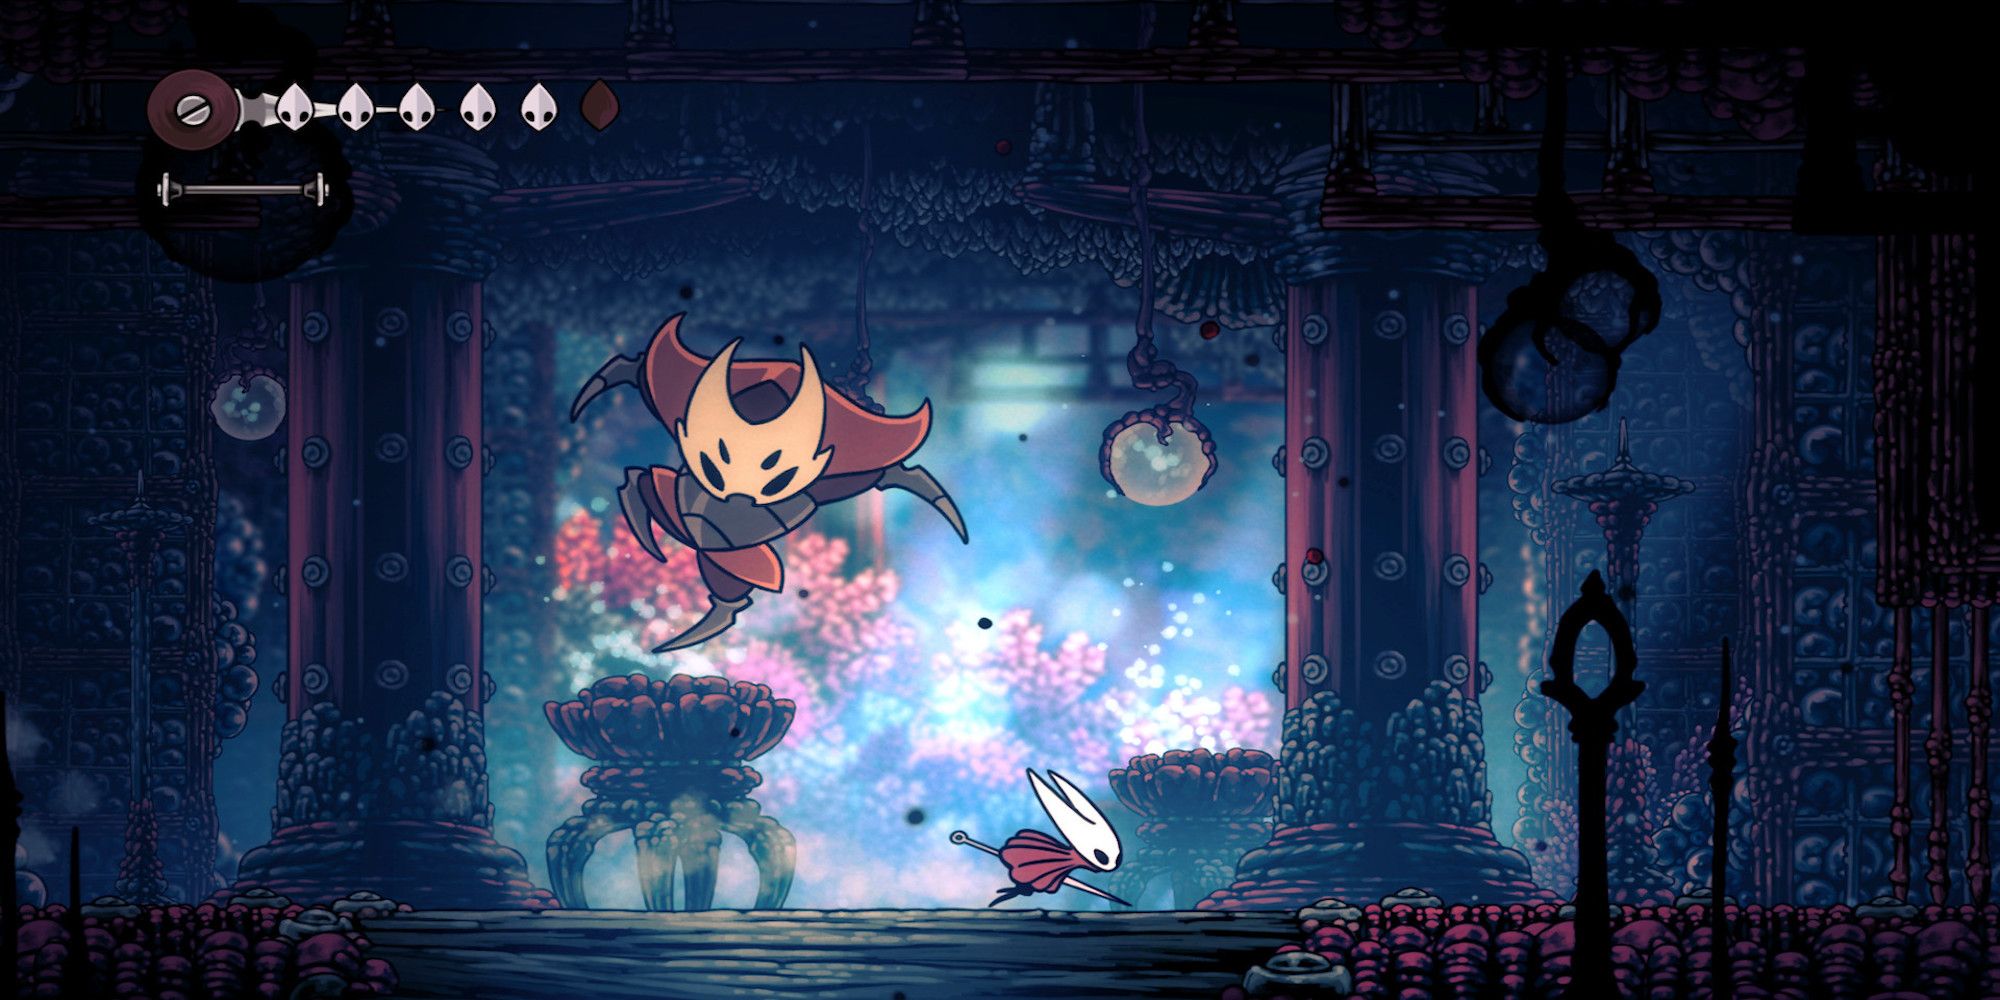 Fighting a boss in Hollow Knight Silksong